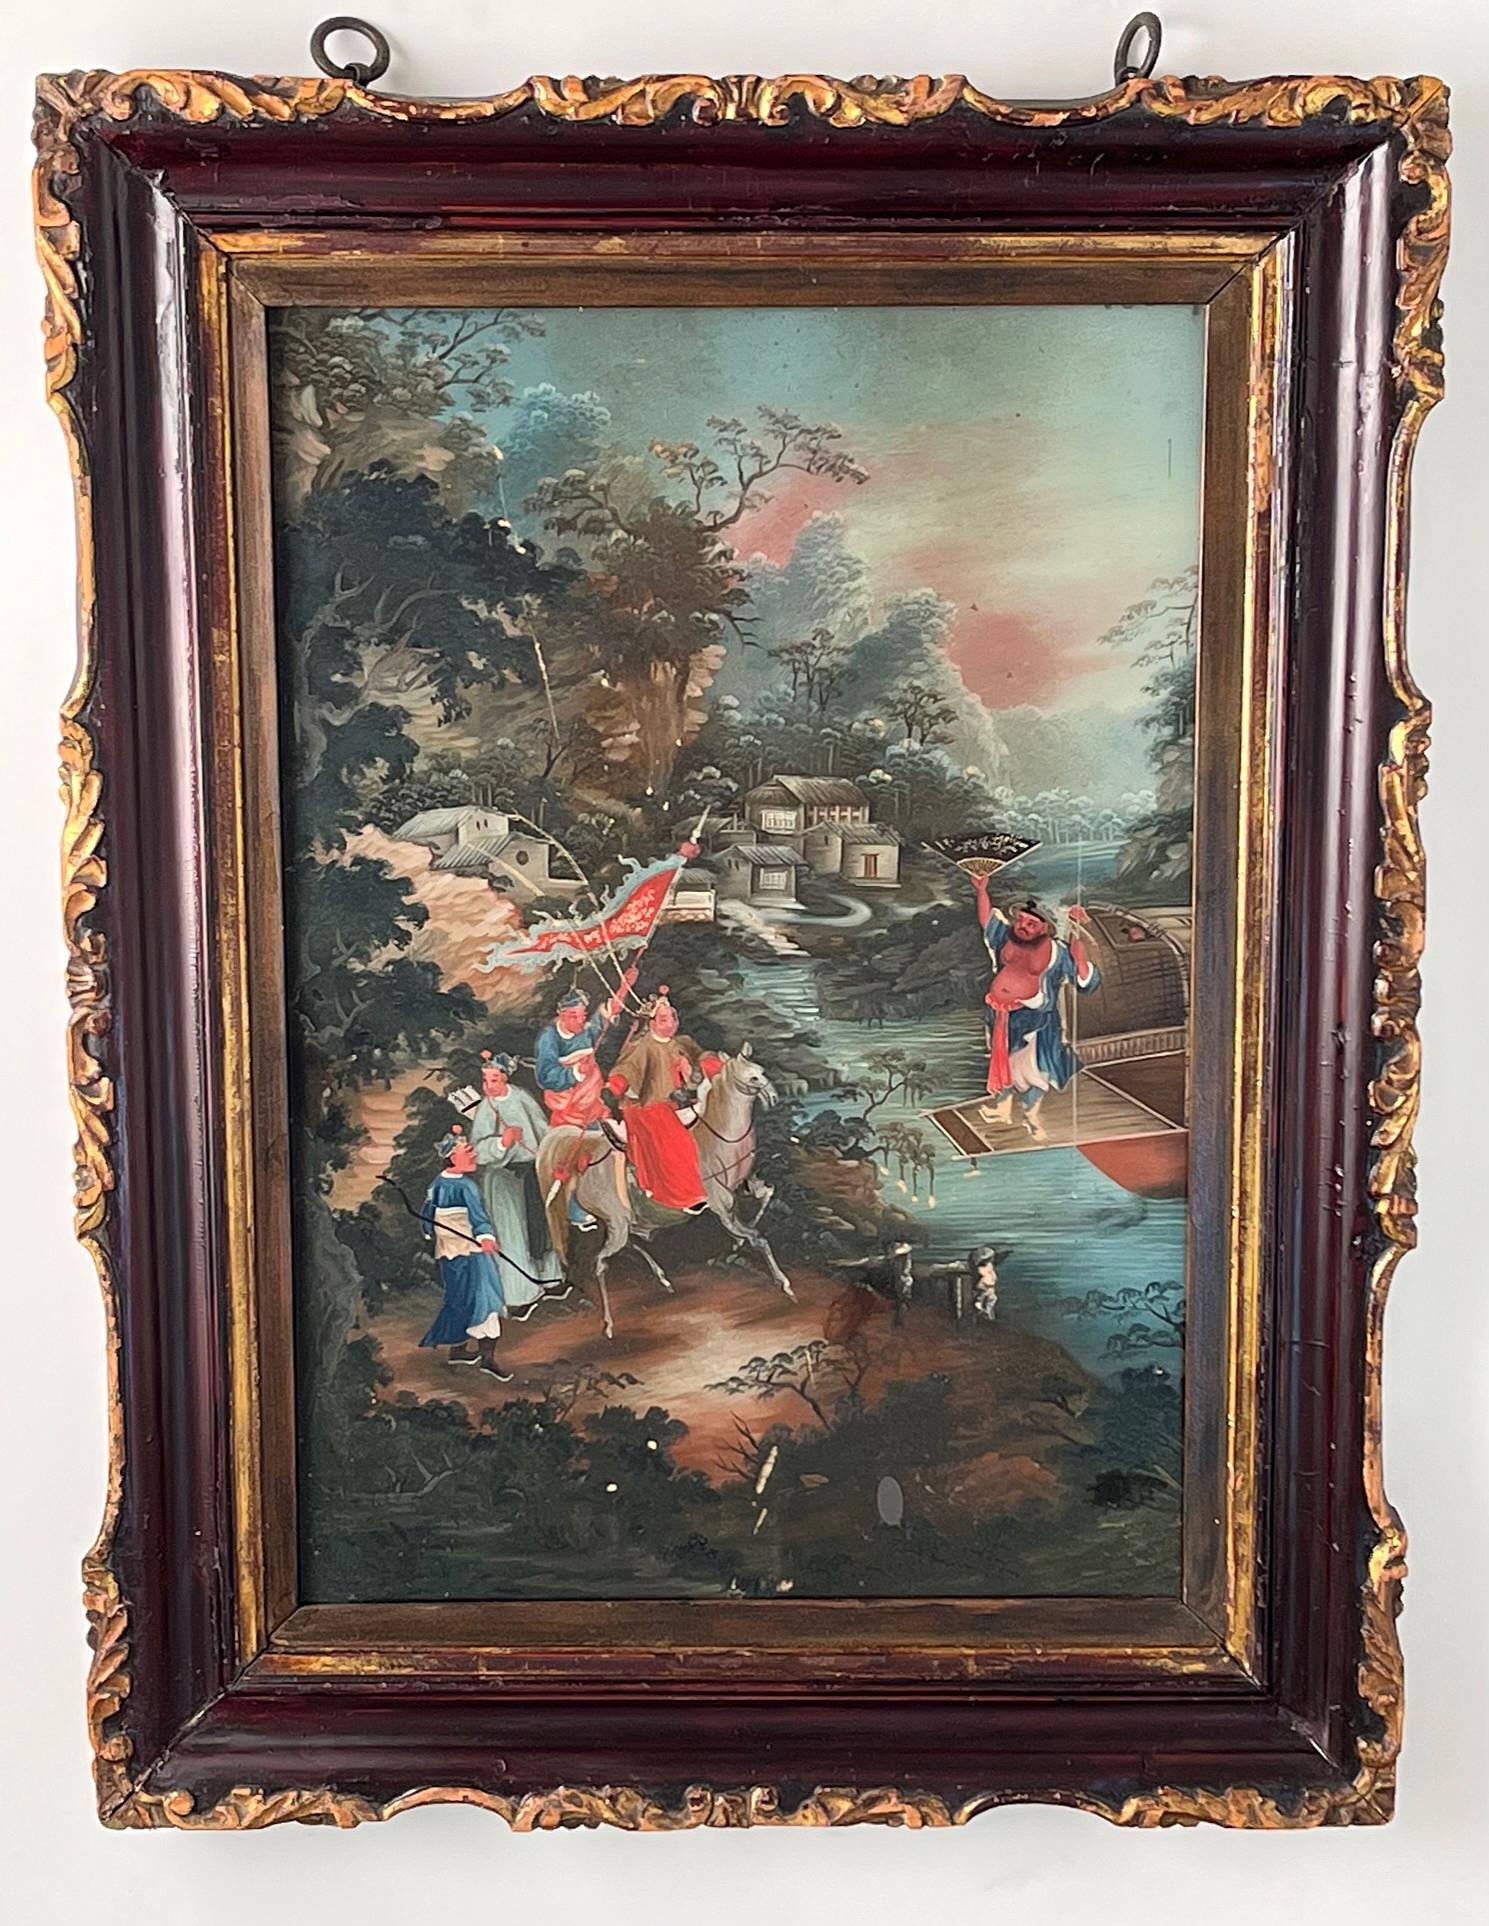 Chinese Export Reverse Glass Painting of Warriors in Landscape, circa 1825 For Sale 2